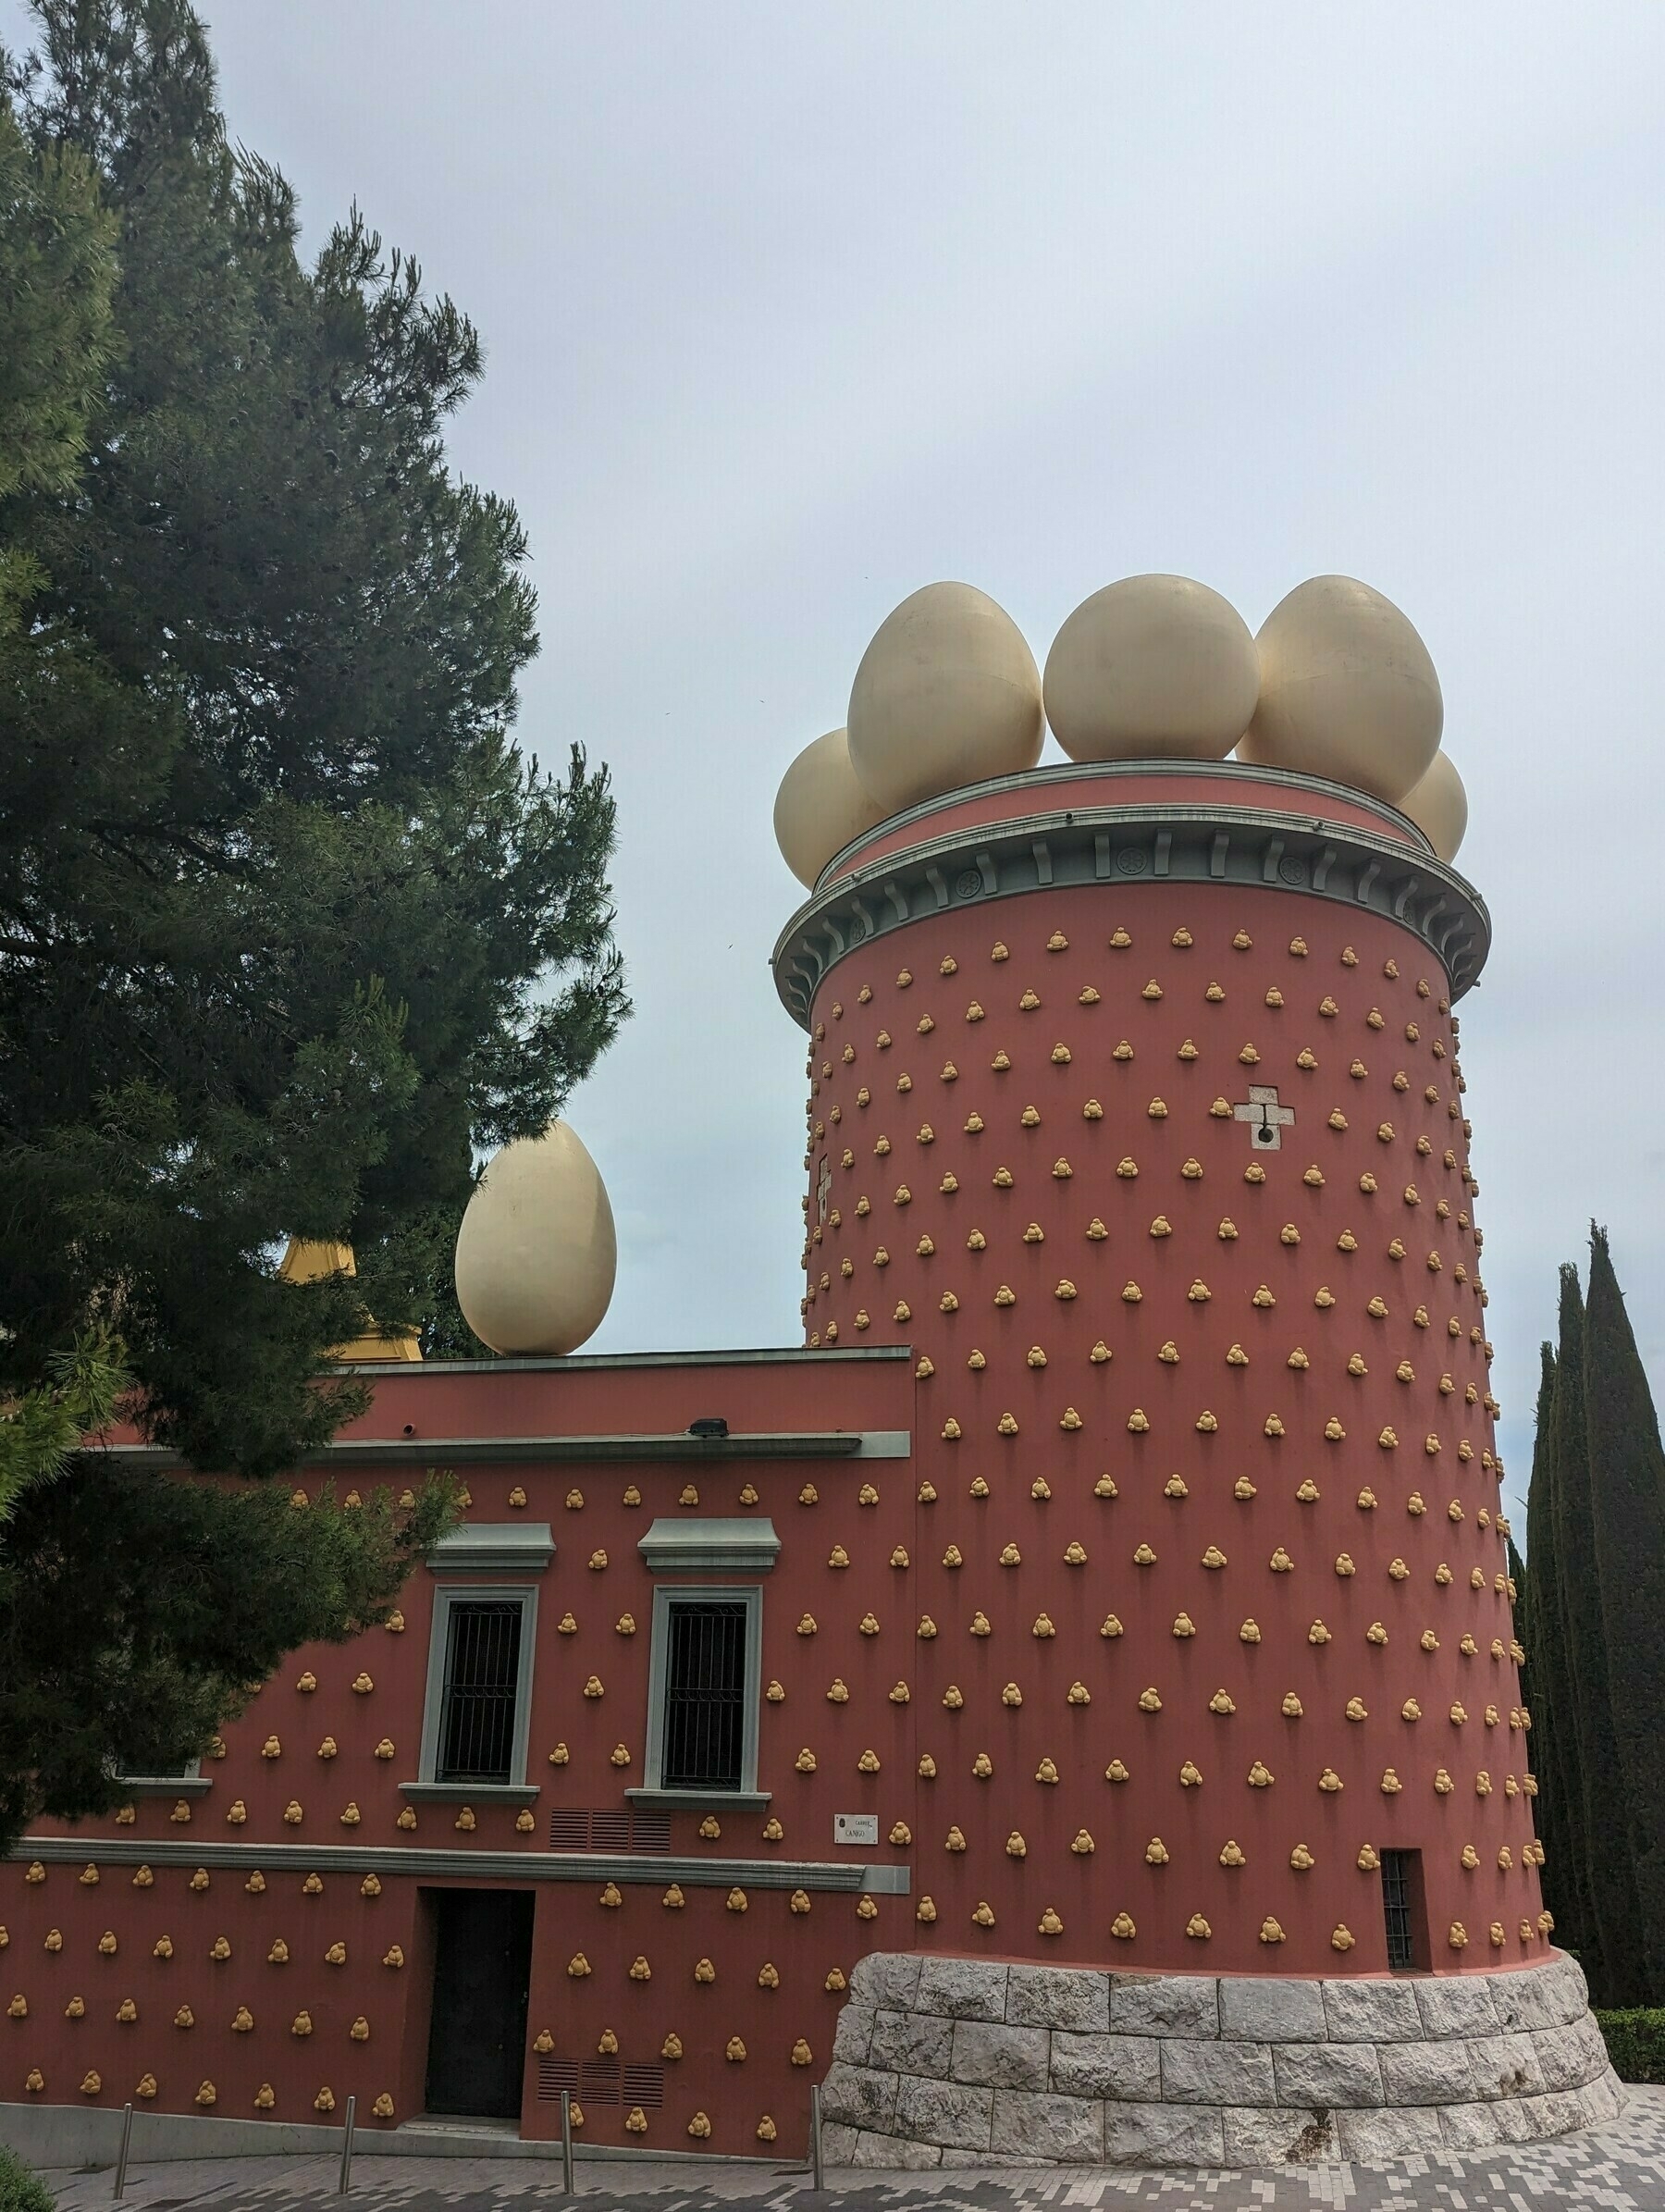 The maroon wall and tower of the Dalí Theatre and Museum building.